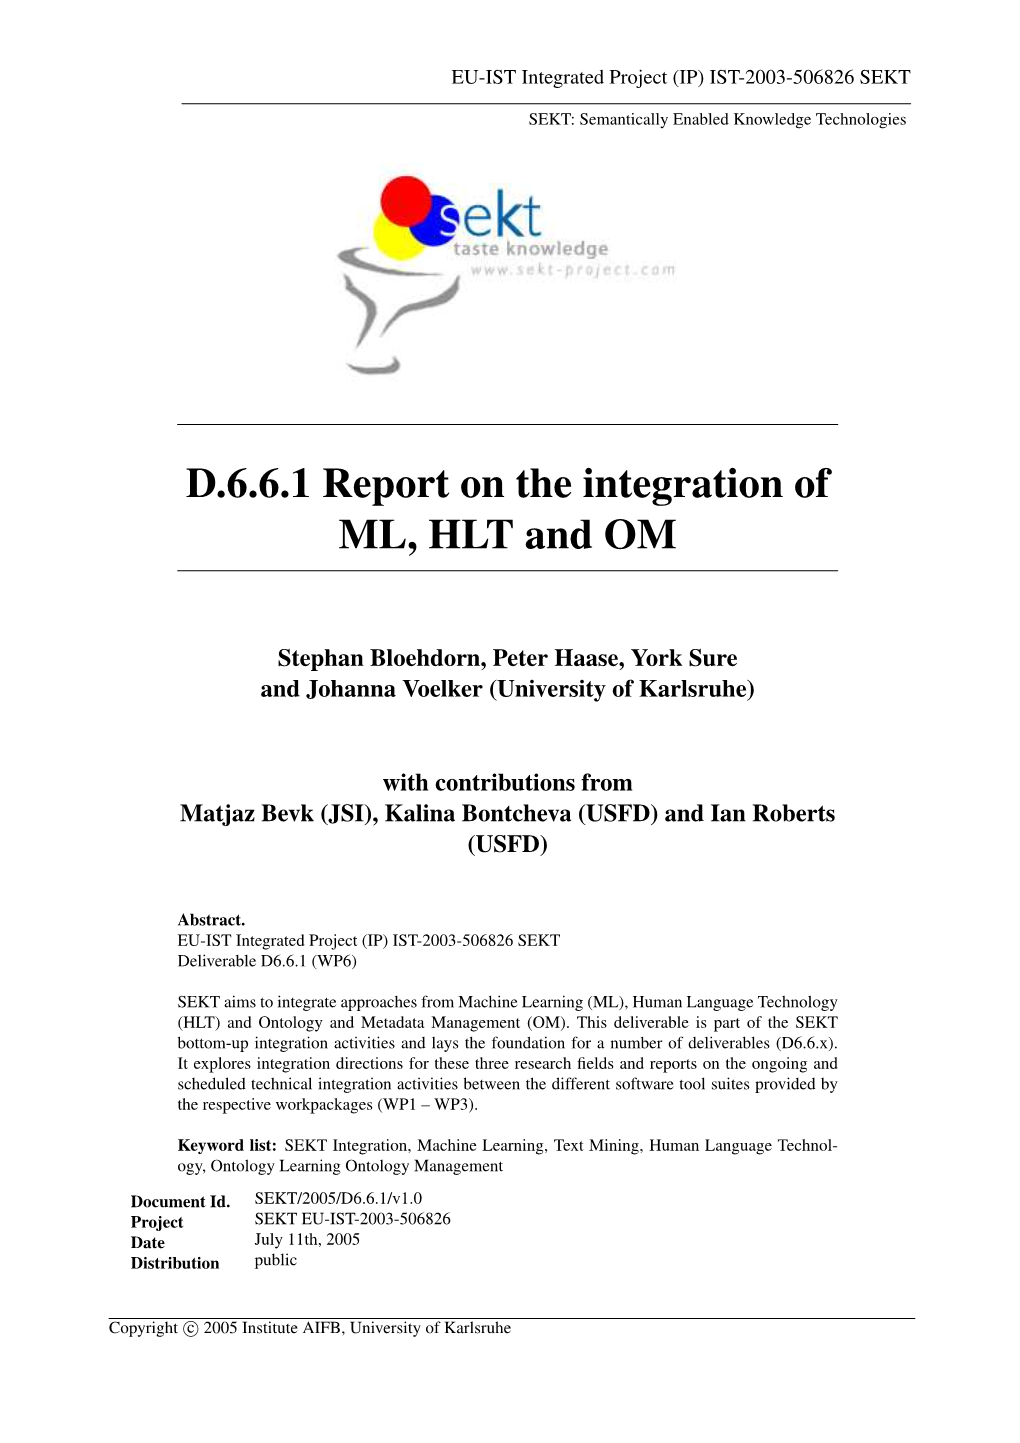 D.6.6.1 Report on the Integration of ML, HLT and OM